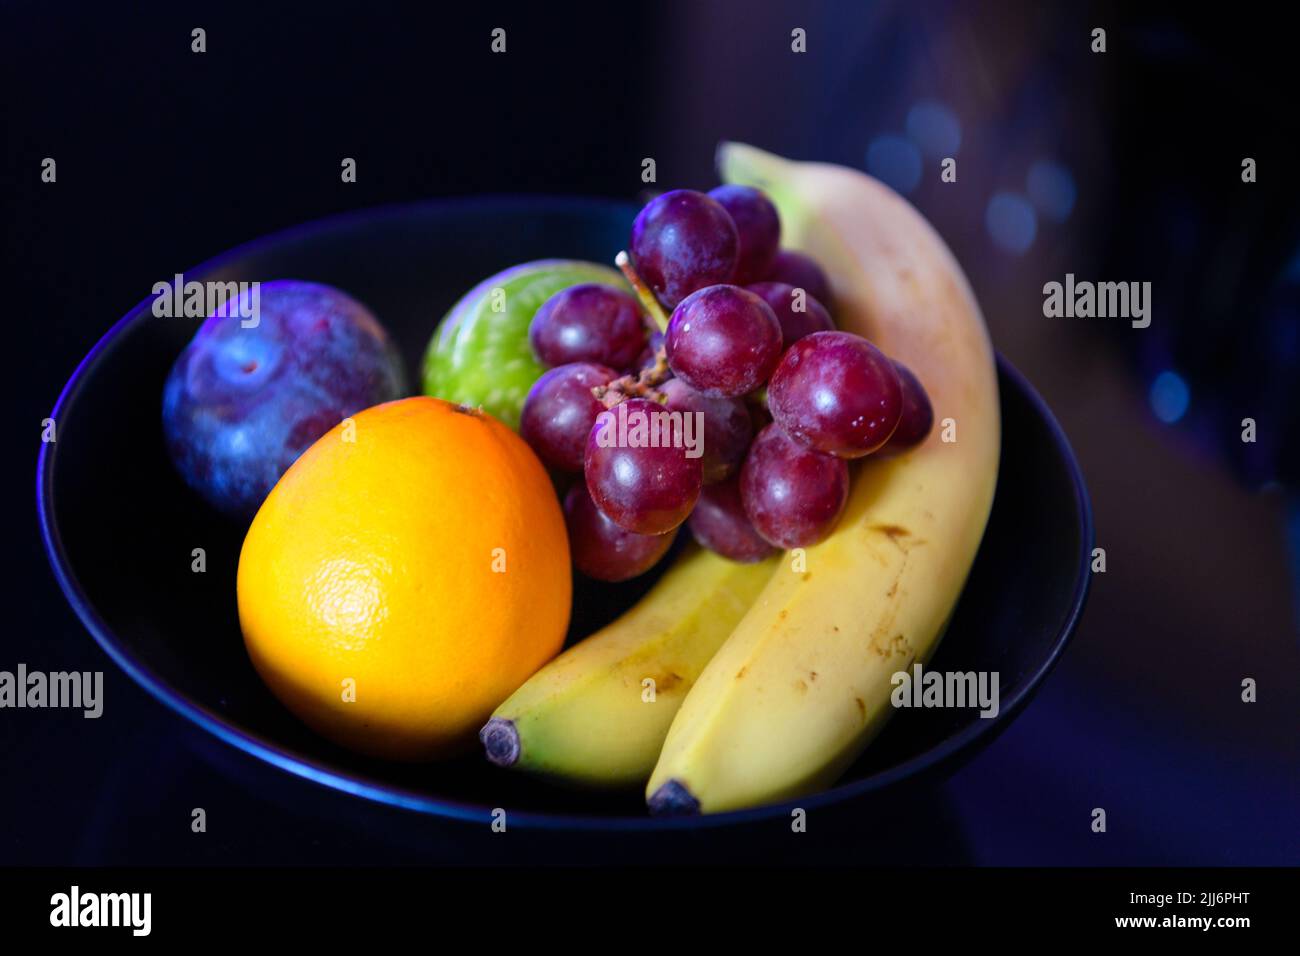 A plate with different types of fruits Stock Photo